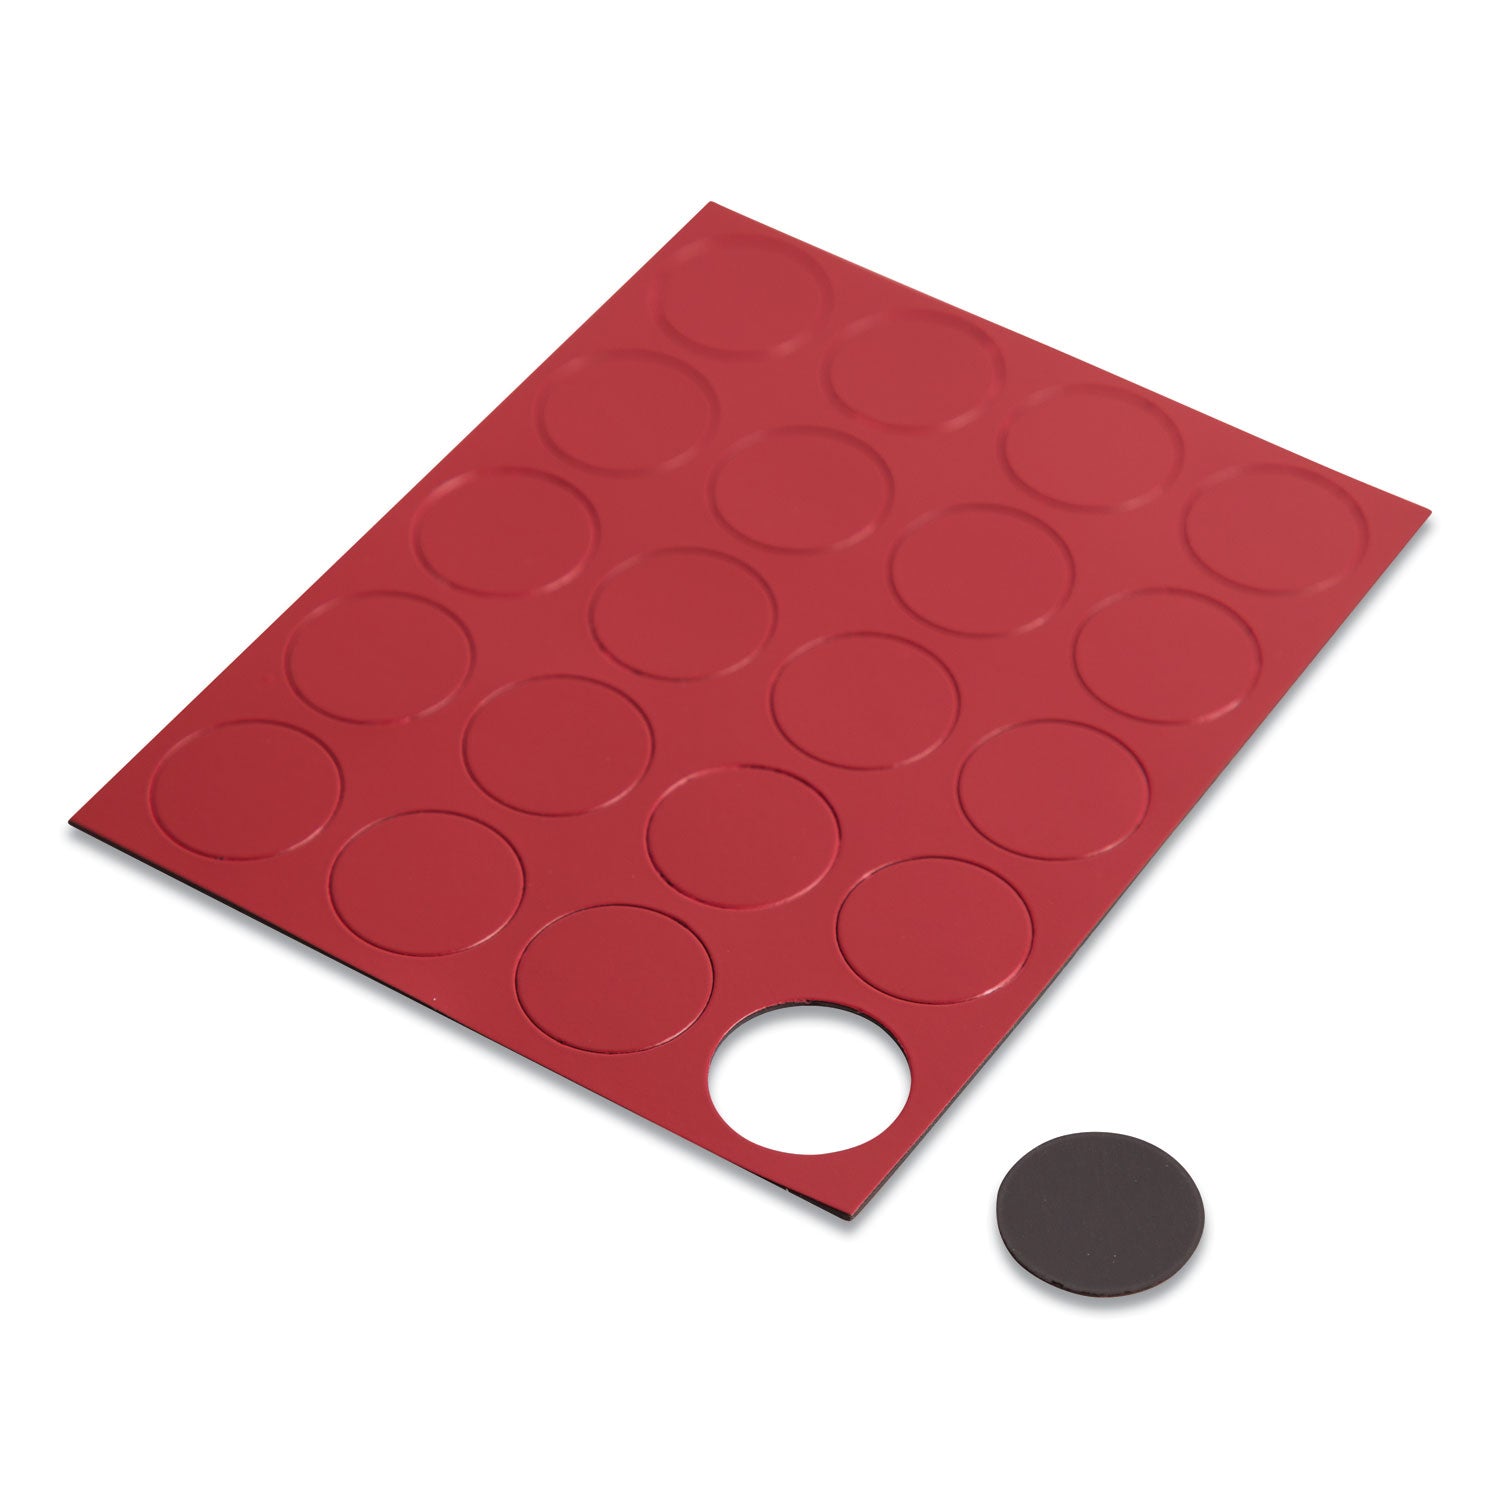 heavy-duty-board-magnets-circles-red-075-diameter-20-pack_ubrfm1604 - 1